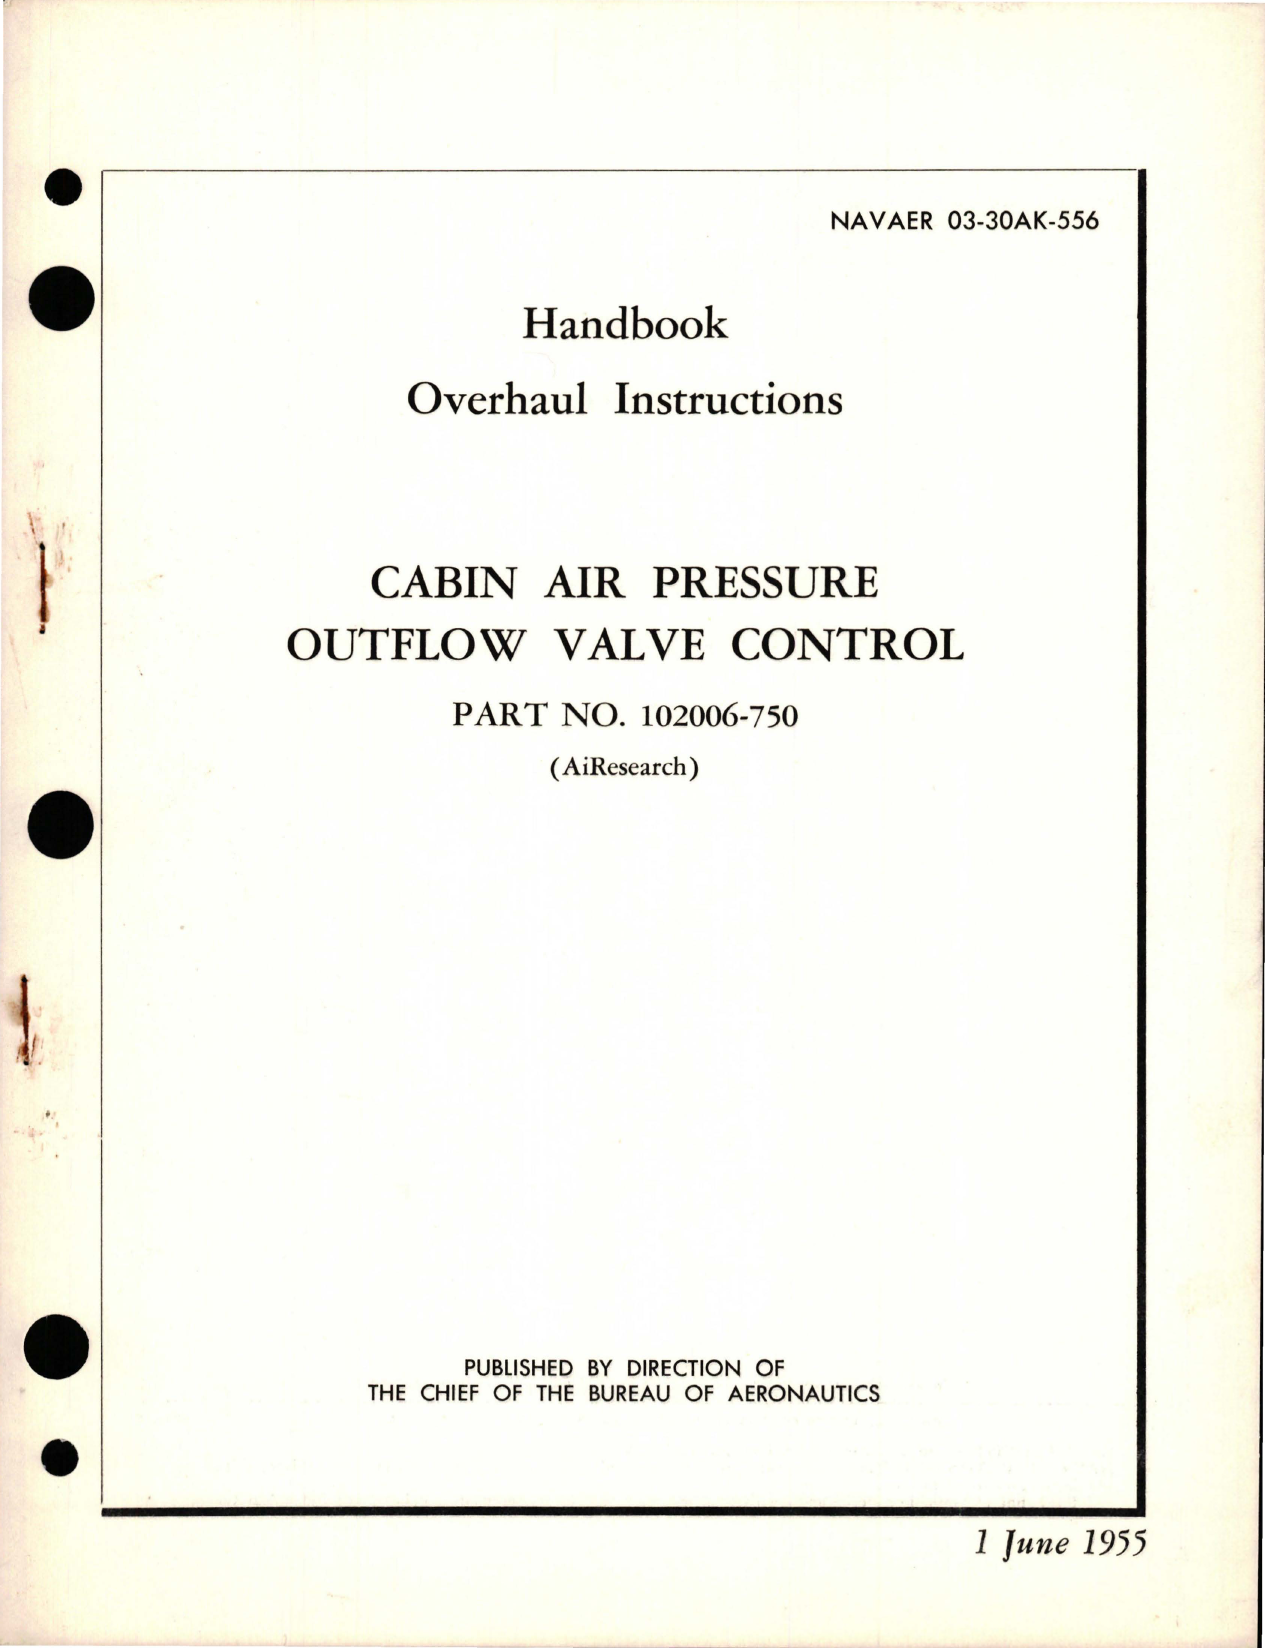 Sample page 1 from AirCorps Library document: Overhaul Instructions for Cabin Air Pressure Outflow Valve Control - Part 102006-750 